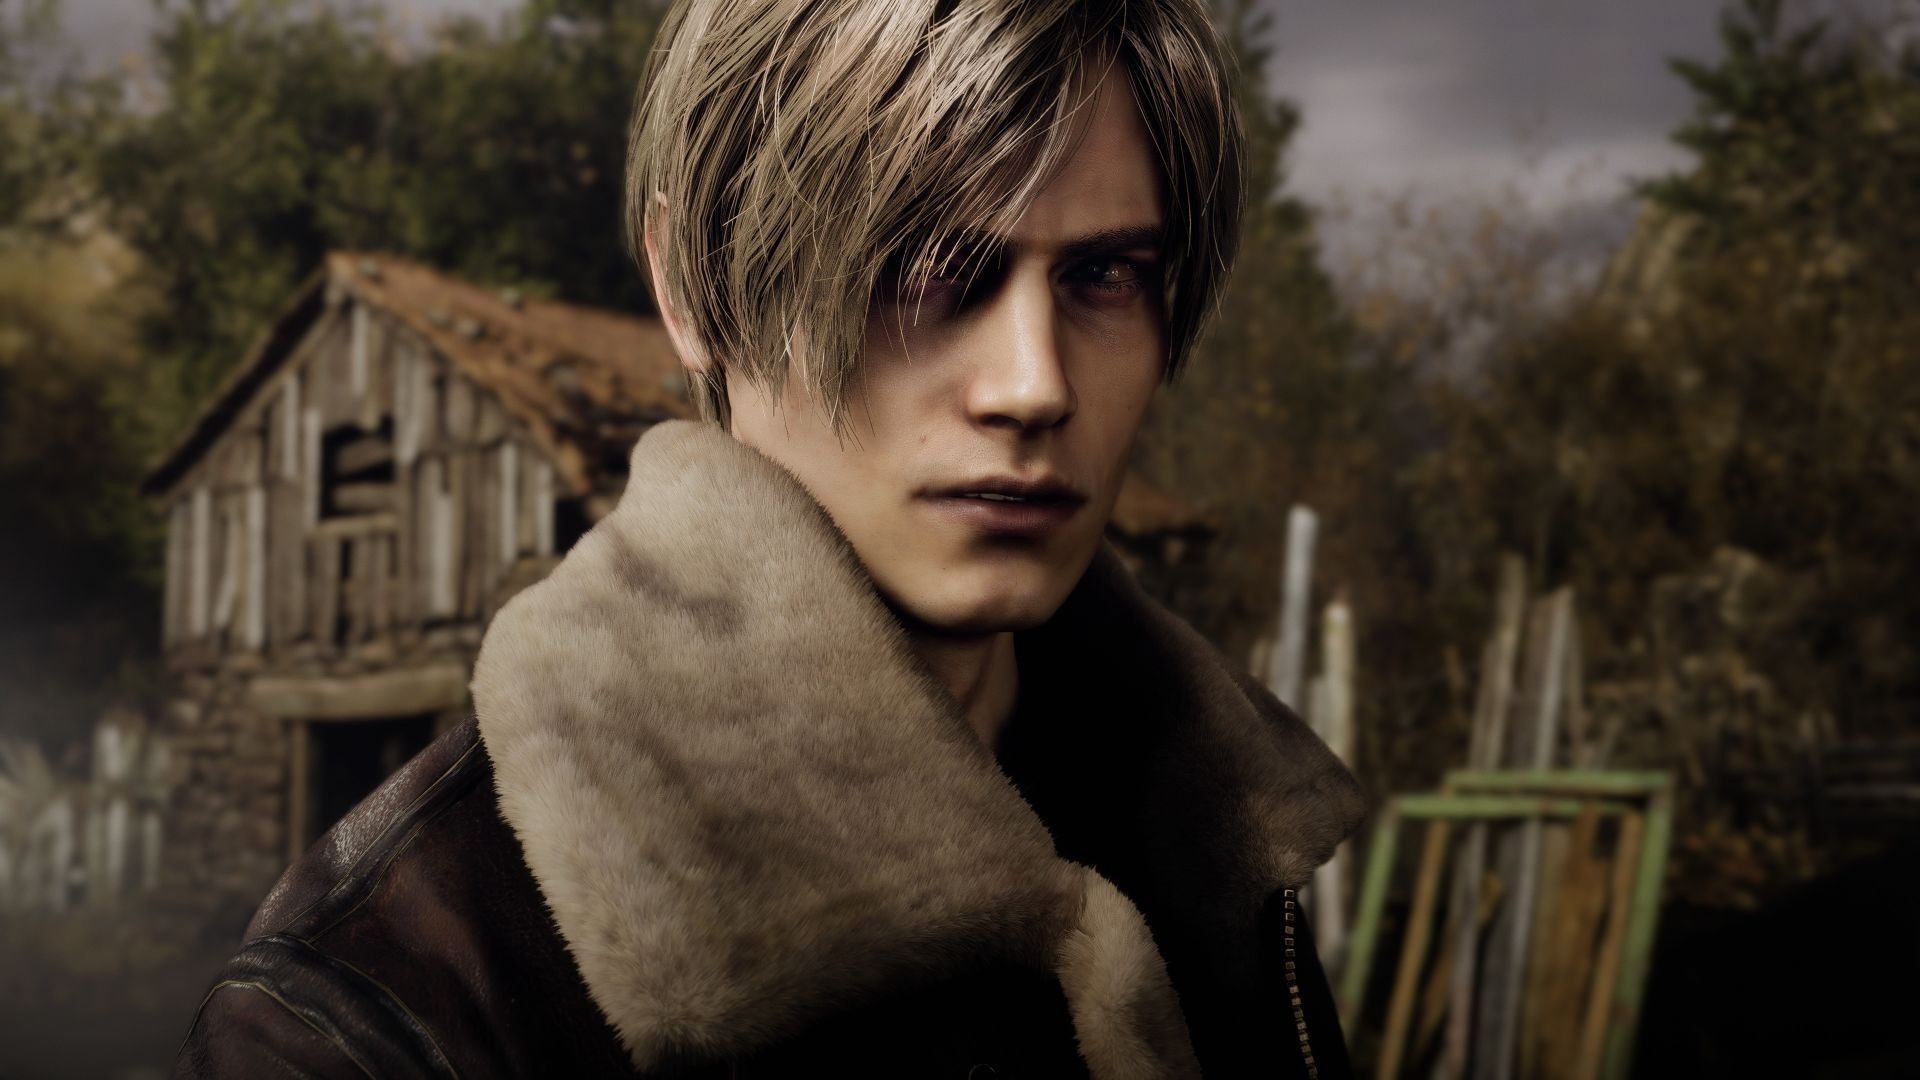 Resident Evil 4 Remake's Story Length Will Be The Same As The Original 